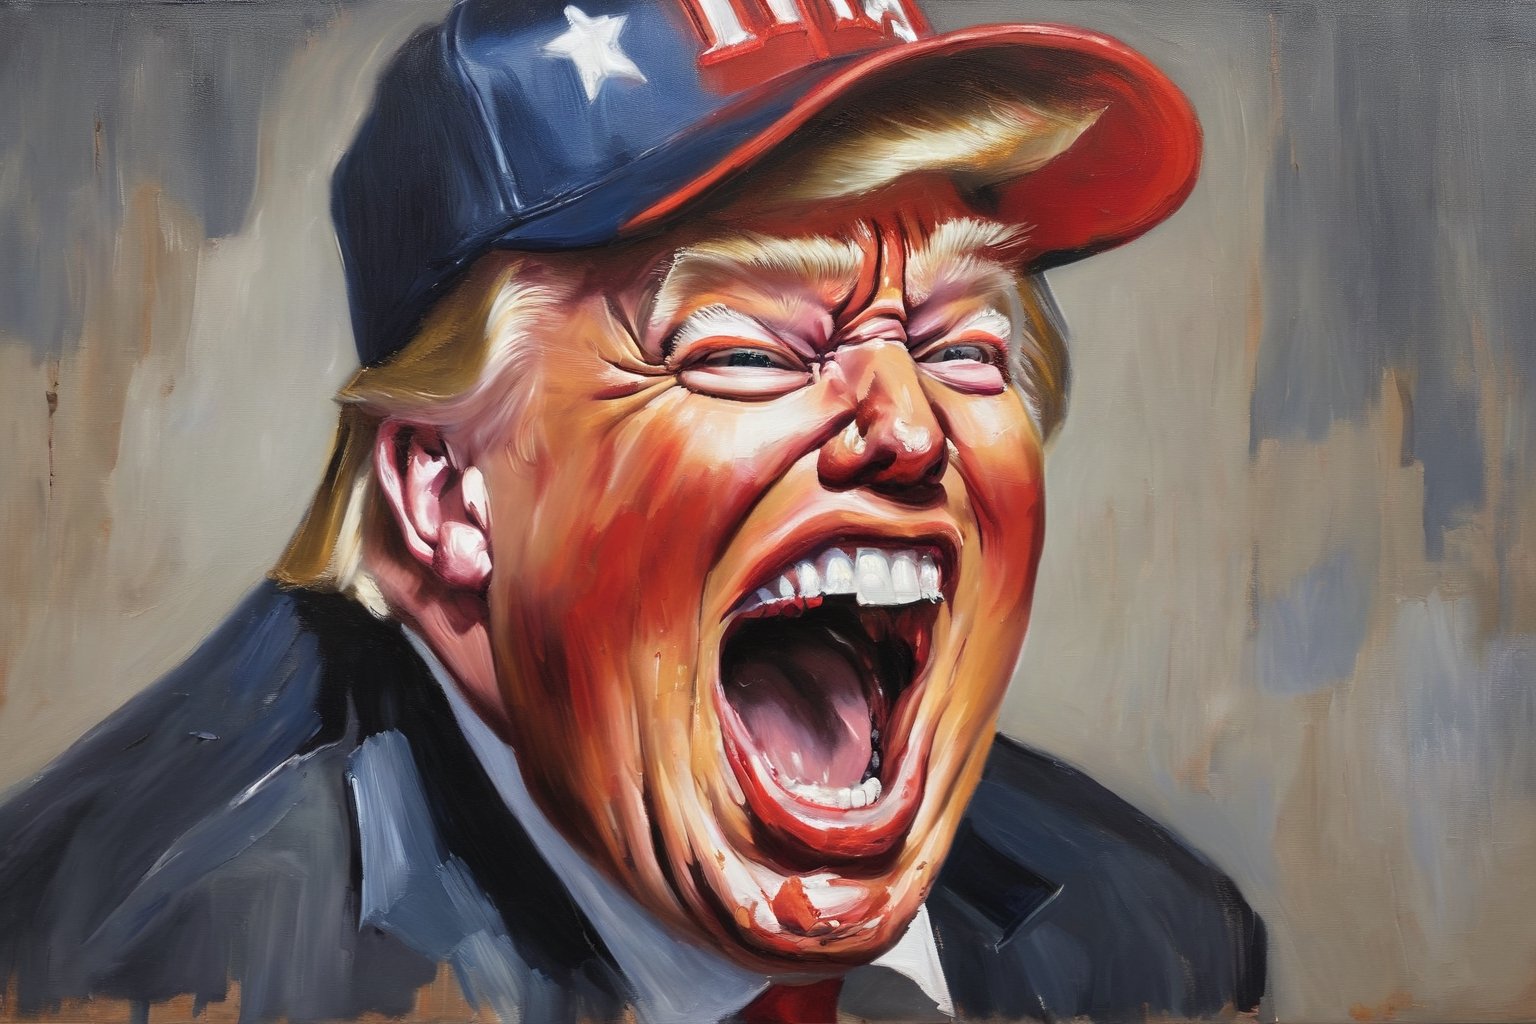 Oil Painting. Portrait of Donald Trump laughing with his mouth open, wearing MAGA baseball cap. v0ng44g p0rtr14t